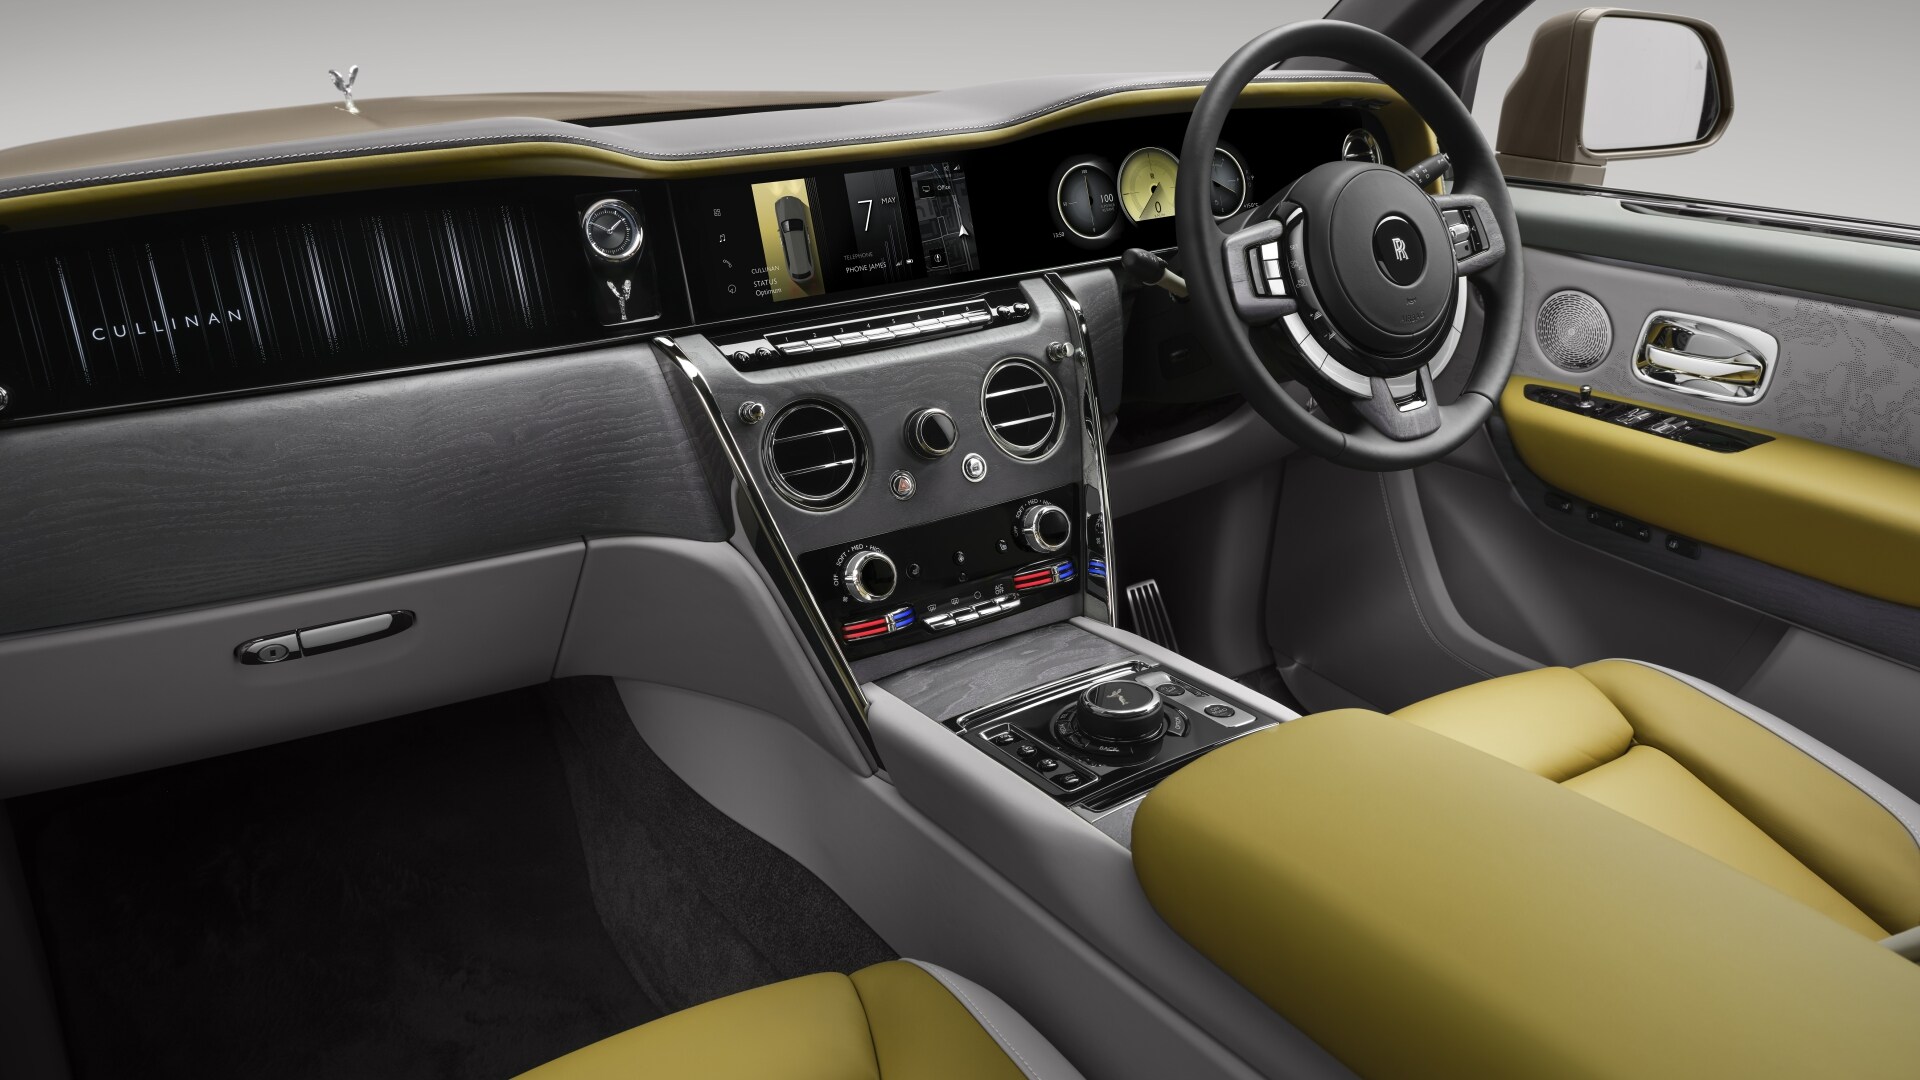 The Interior, Steering, Dashboard, And Central Console Of A Rolls-Royce Cullinan Series II